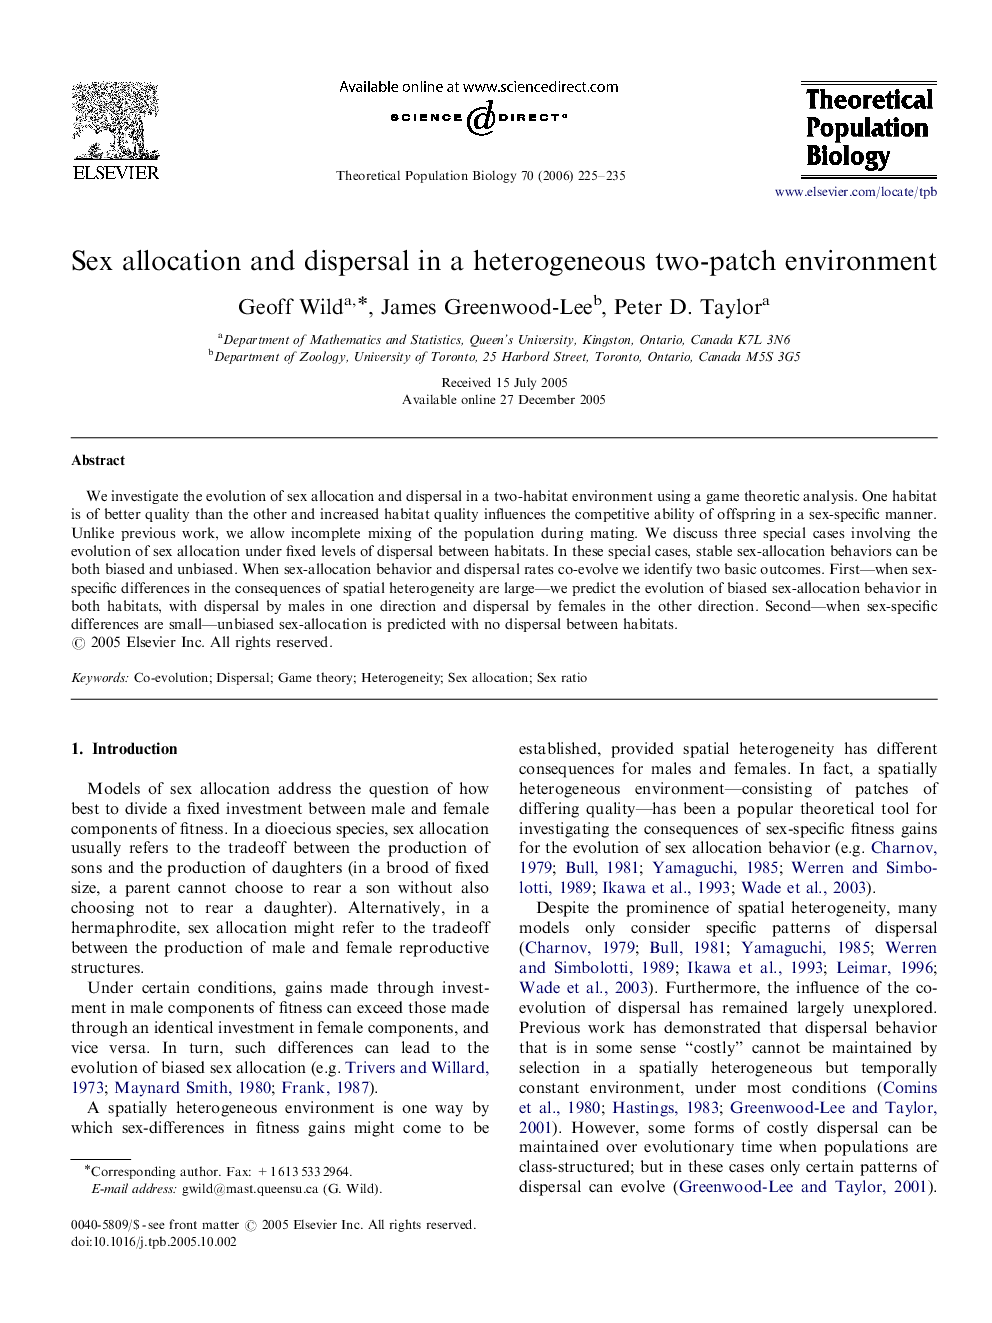 Sex allocation and dispersal in a heterogeneous two-patch environment